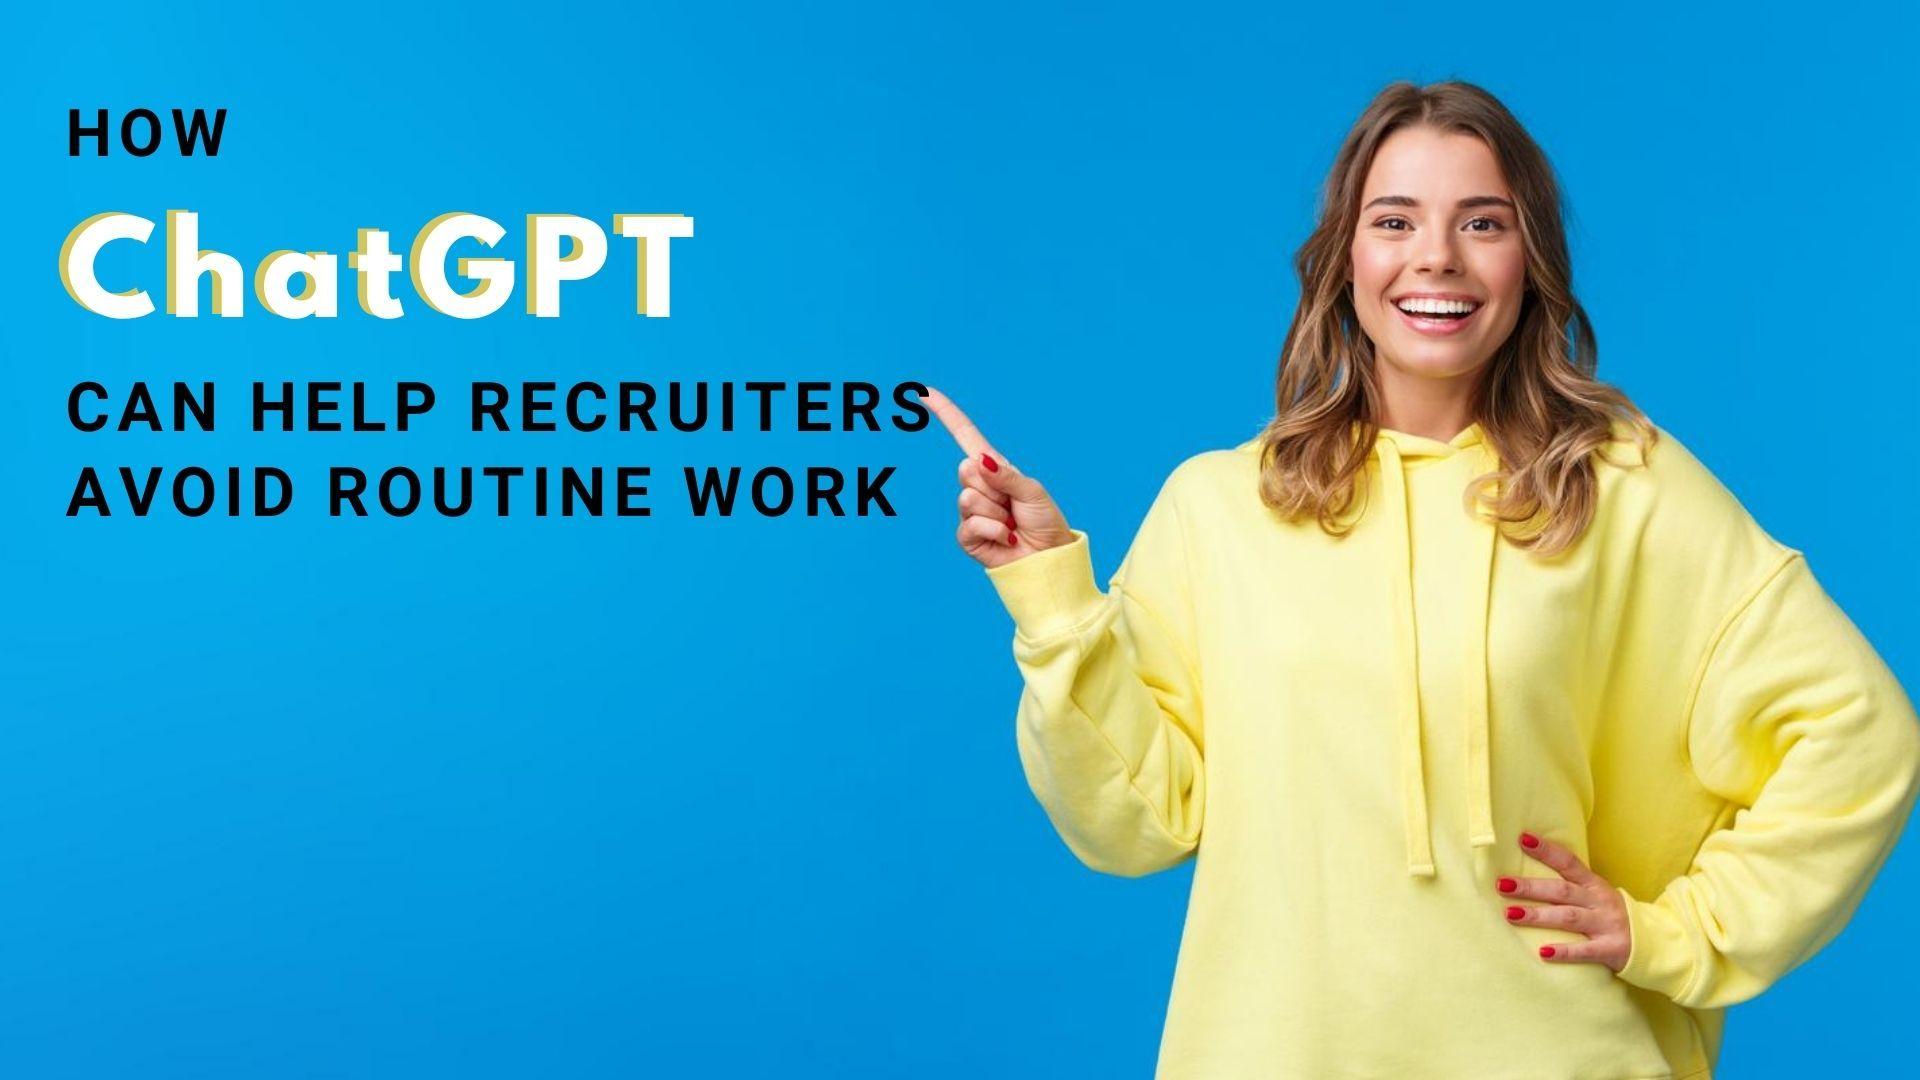 How can chatGPT help recruiters avoid boring, routine work?